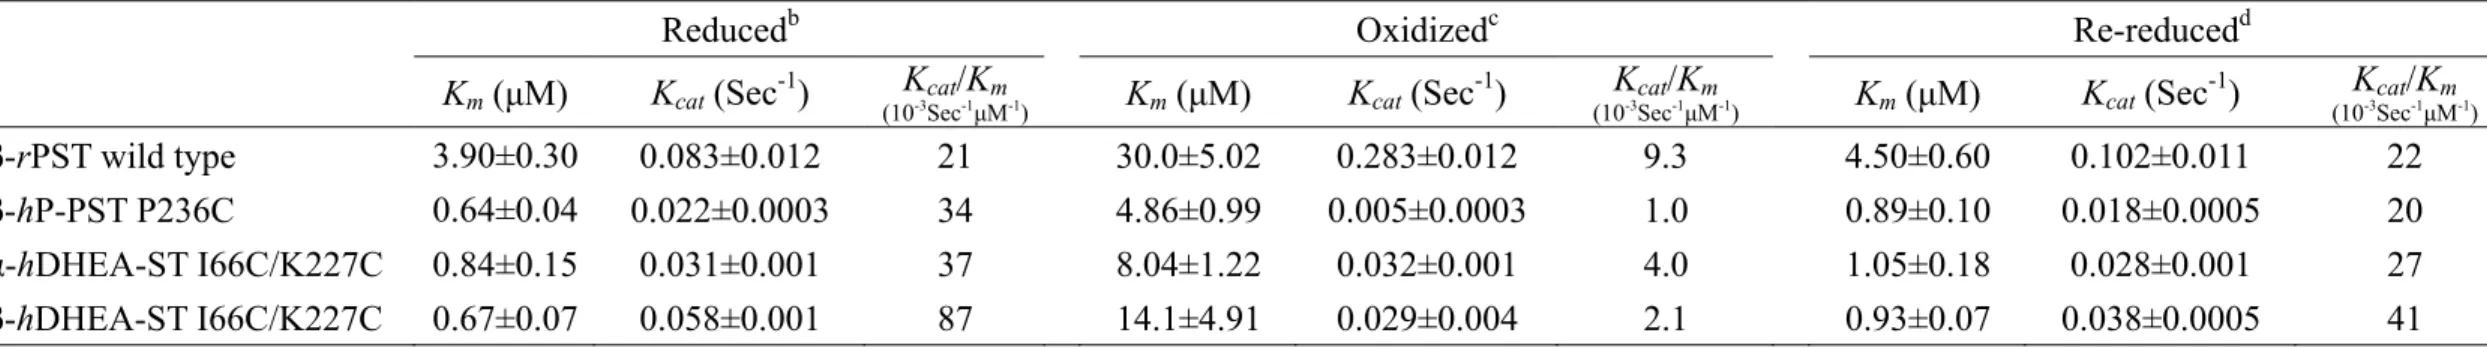 Table 7: Kinetic constants of STs that catalyzed physiological reaction in redox conditions a